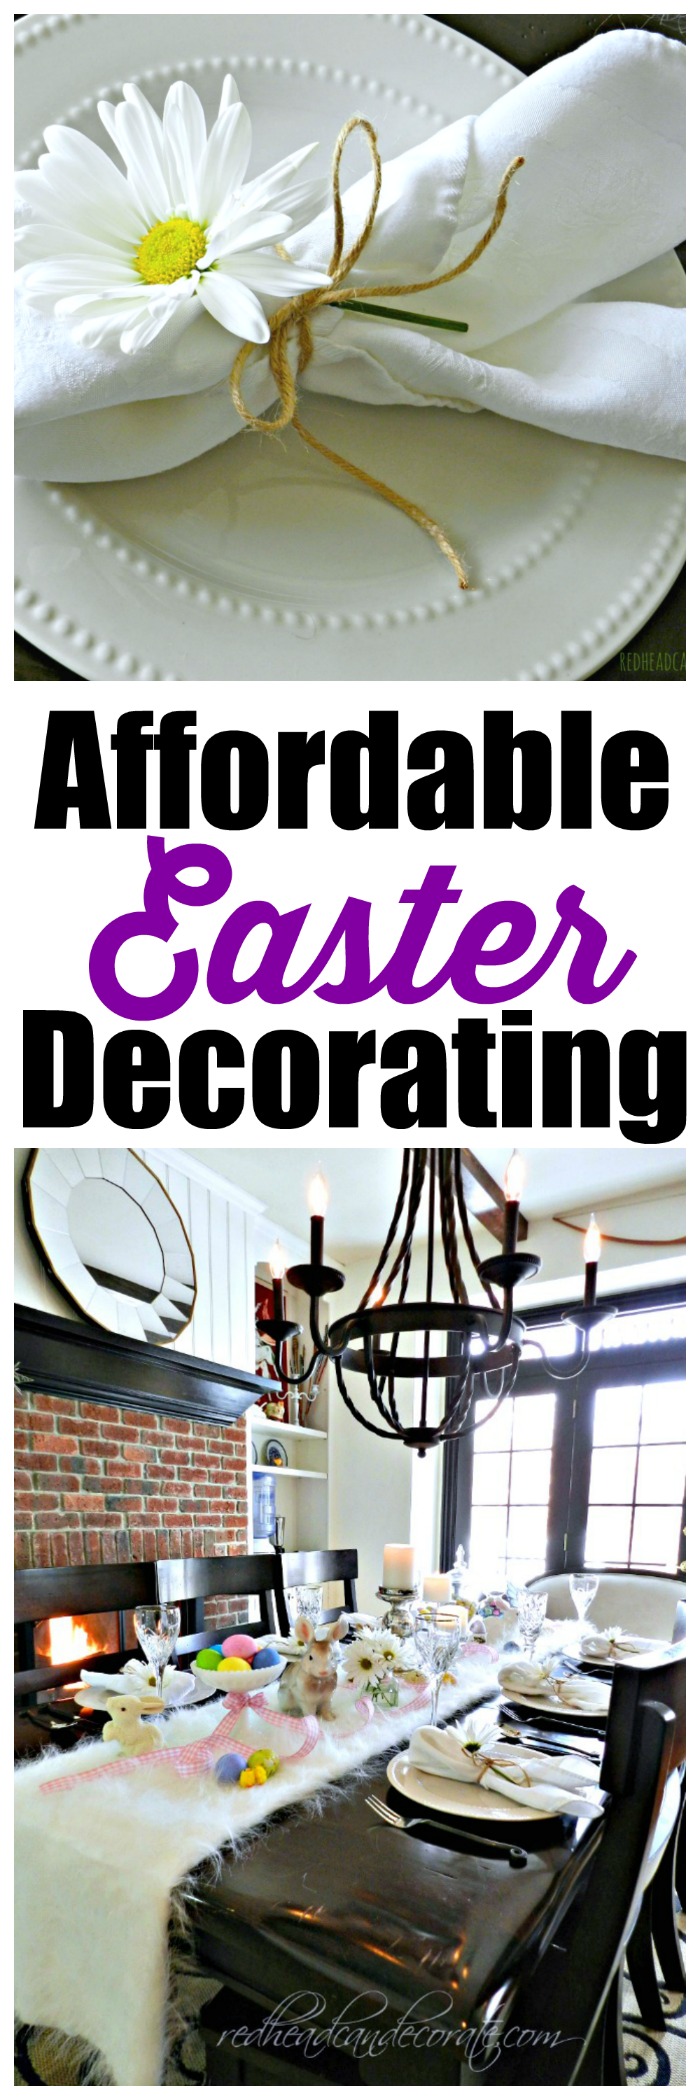 She used dollar store plates & thrift store ceramic bunnies.  There's also a butter lamb, and some other affordable Easter Decorating ideas I would have never thought of.